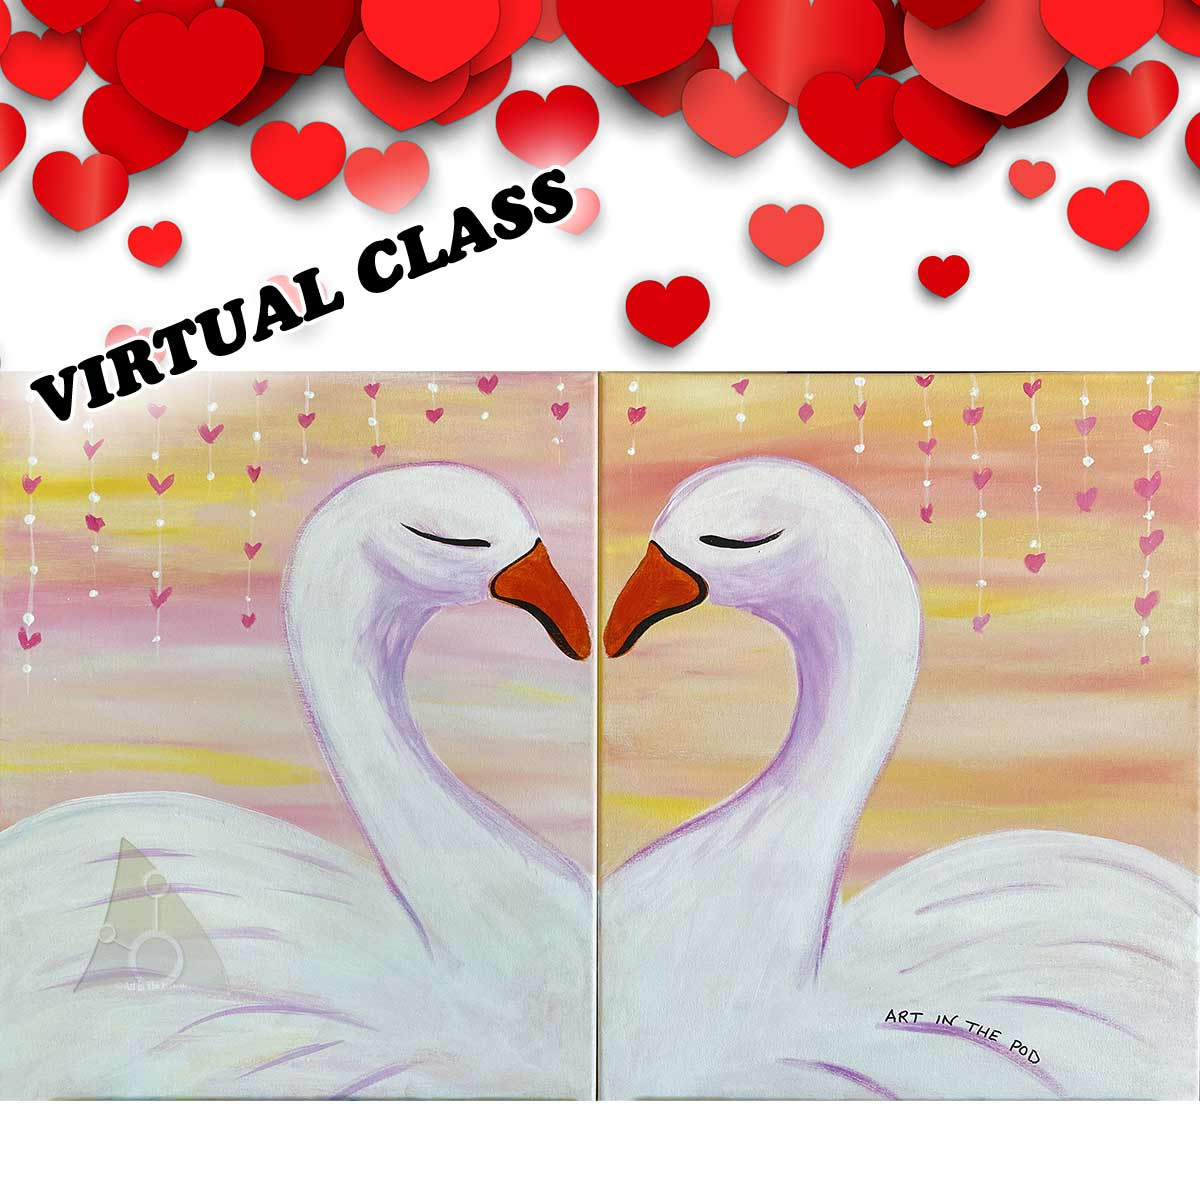 Virtual SWAN LOVE SPECIAL VALENTINE’S FAMILY DAY!